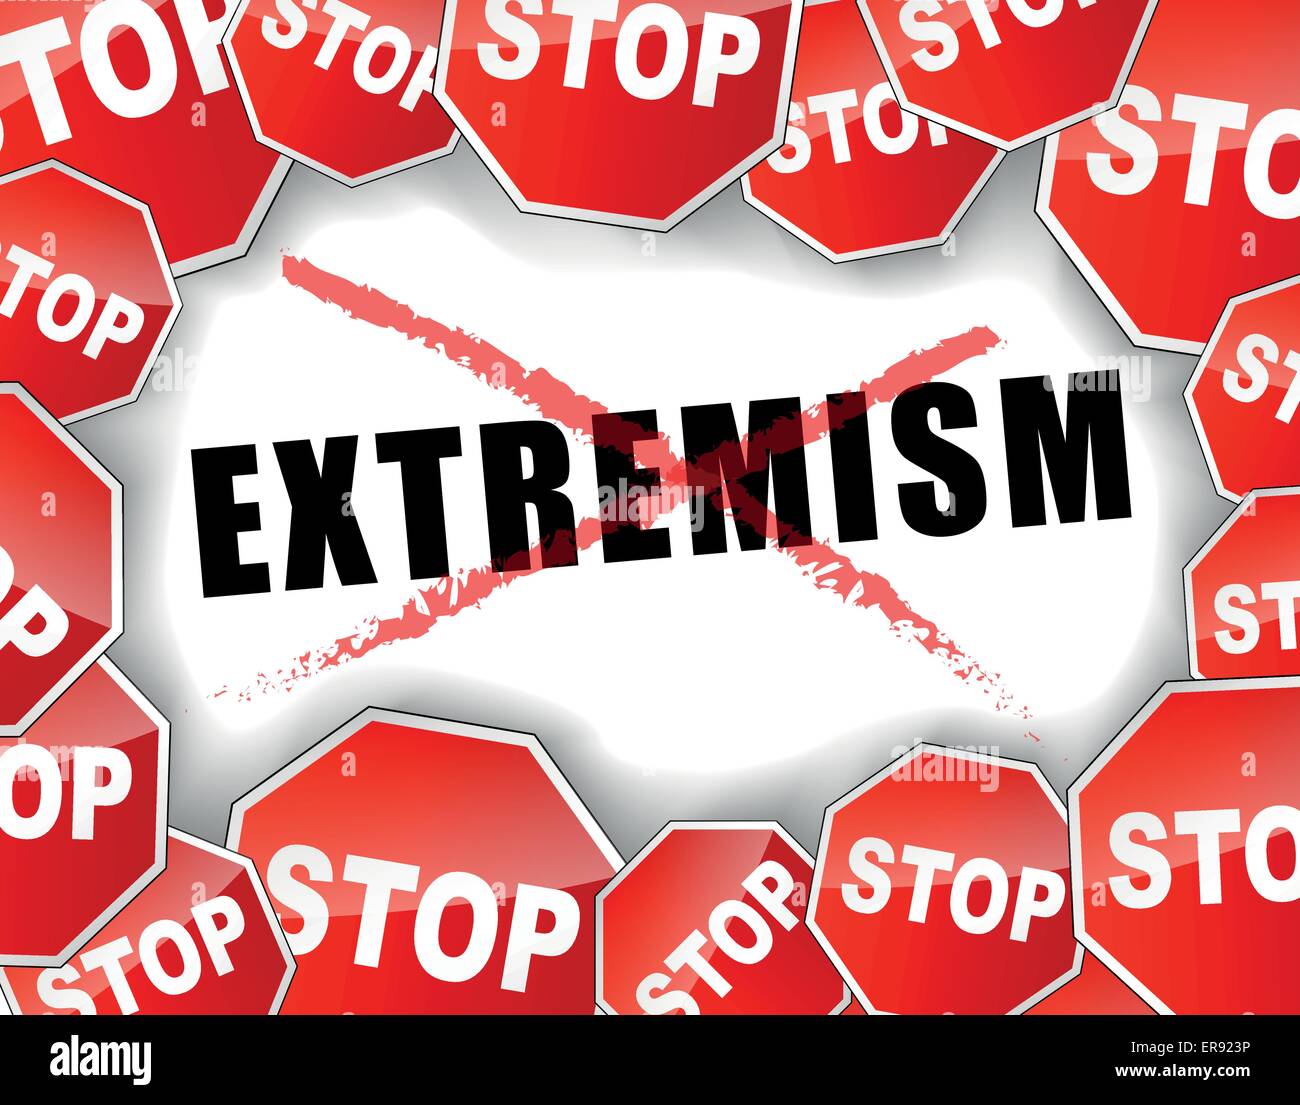 Vector illustration of stop extremism concept background Stock Vector